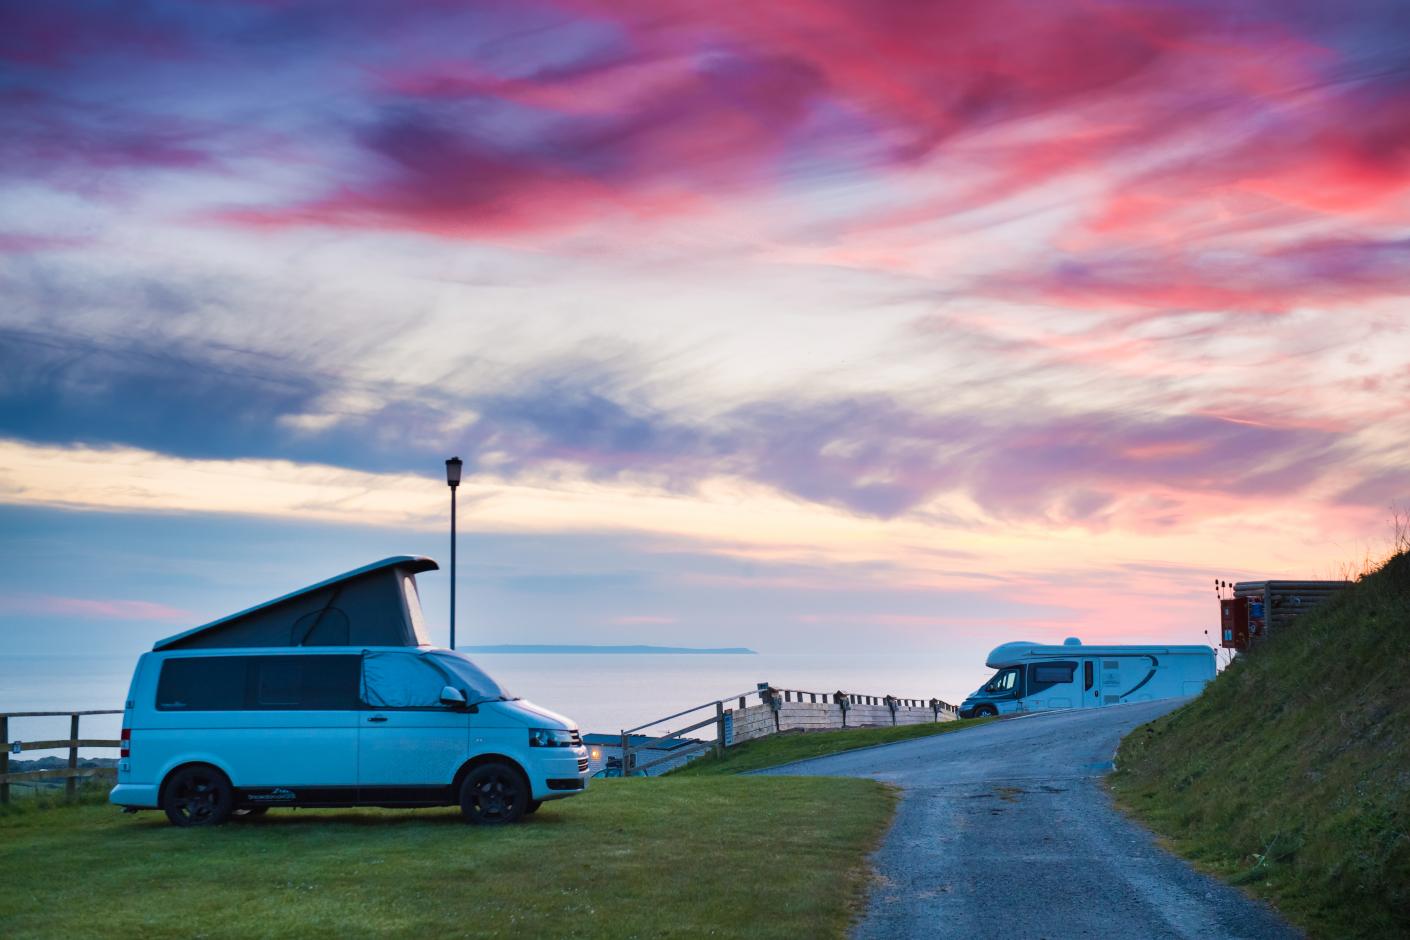 Campervan at Woolacombe Sands Holiday Park - Sunset Sky 